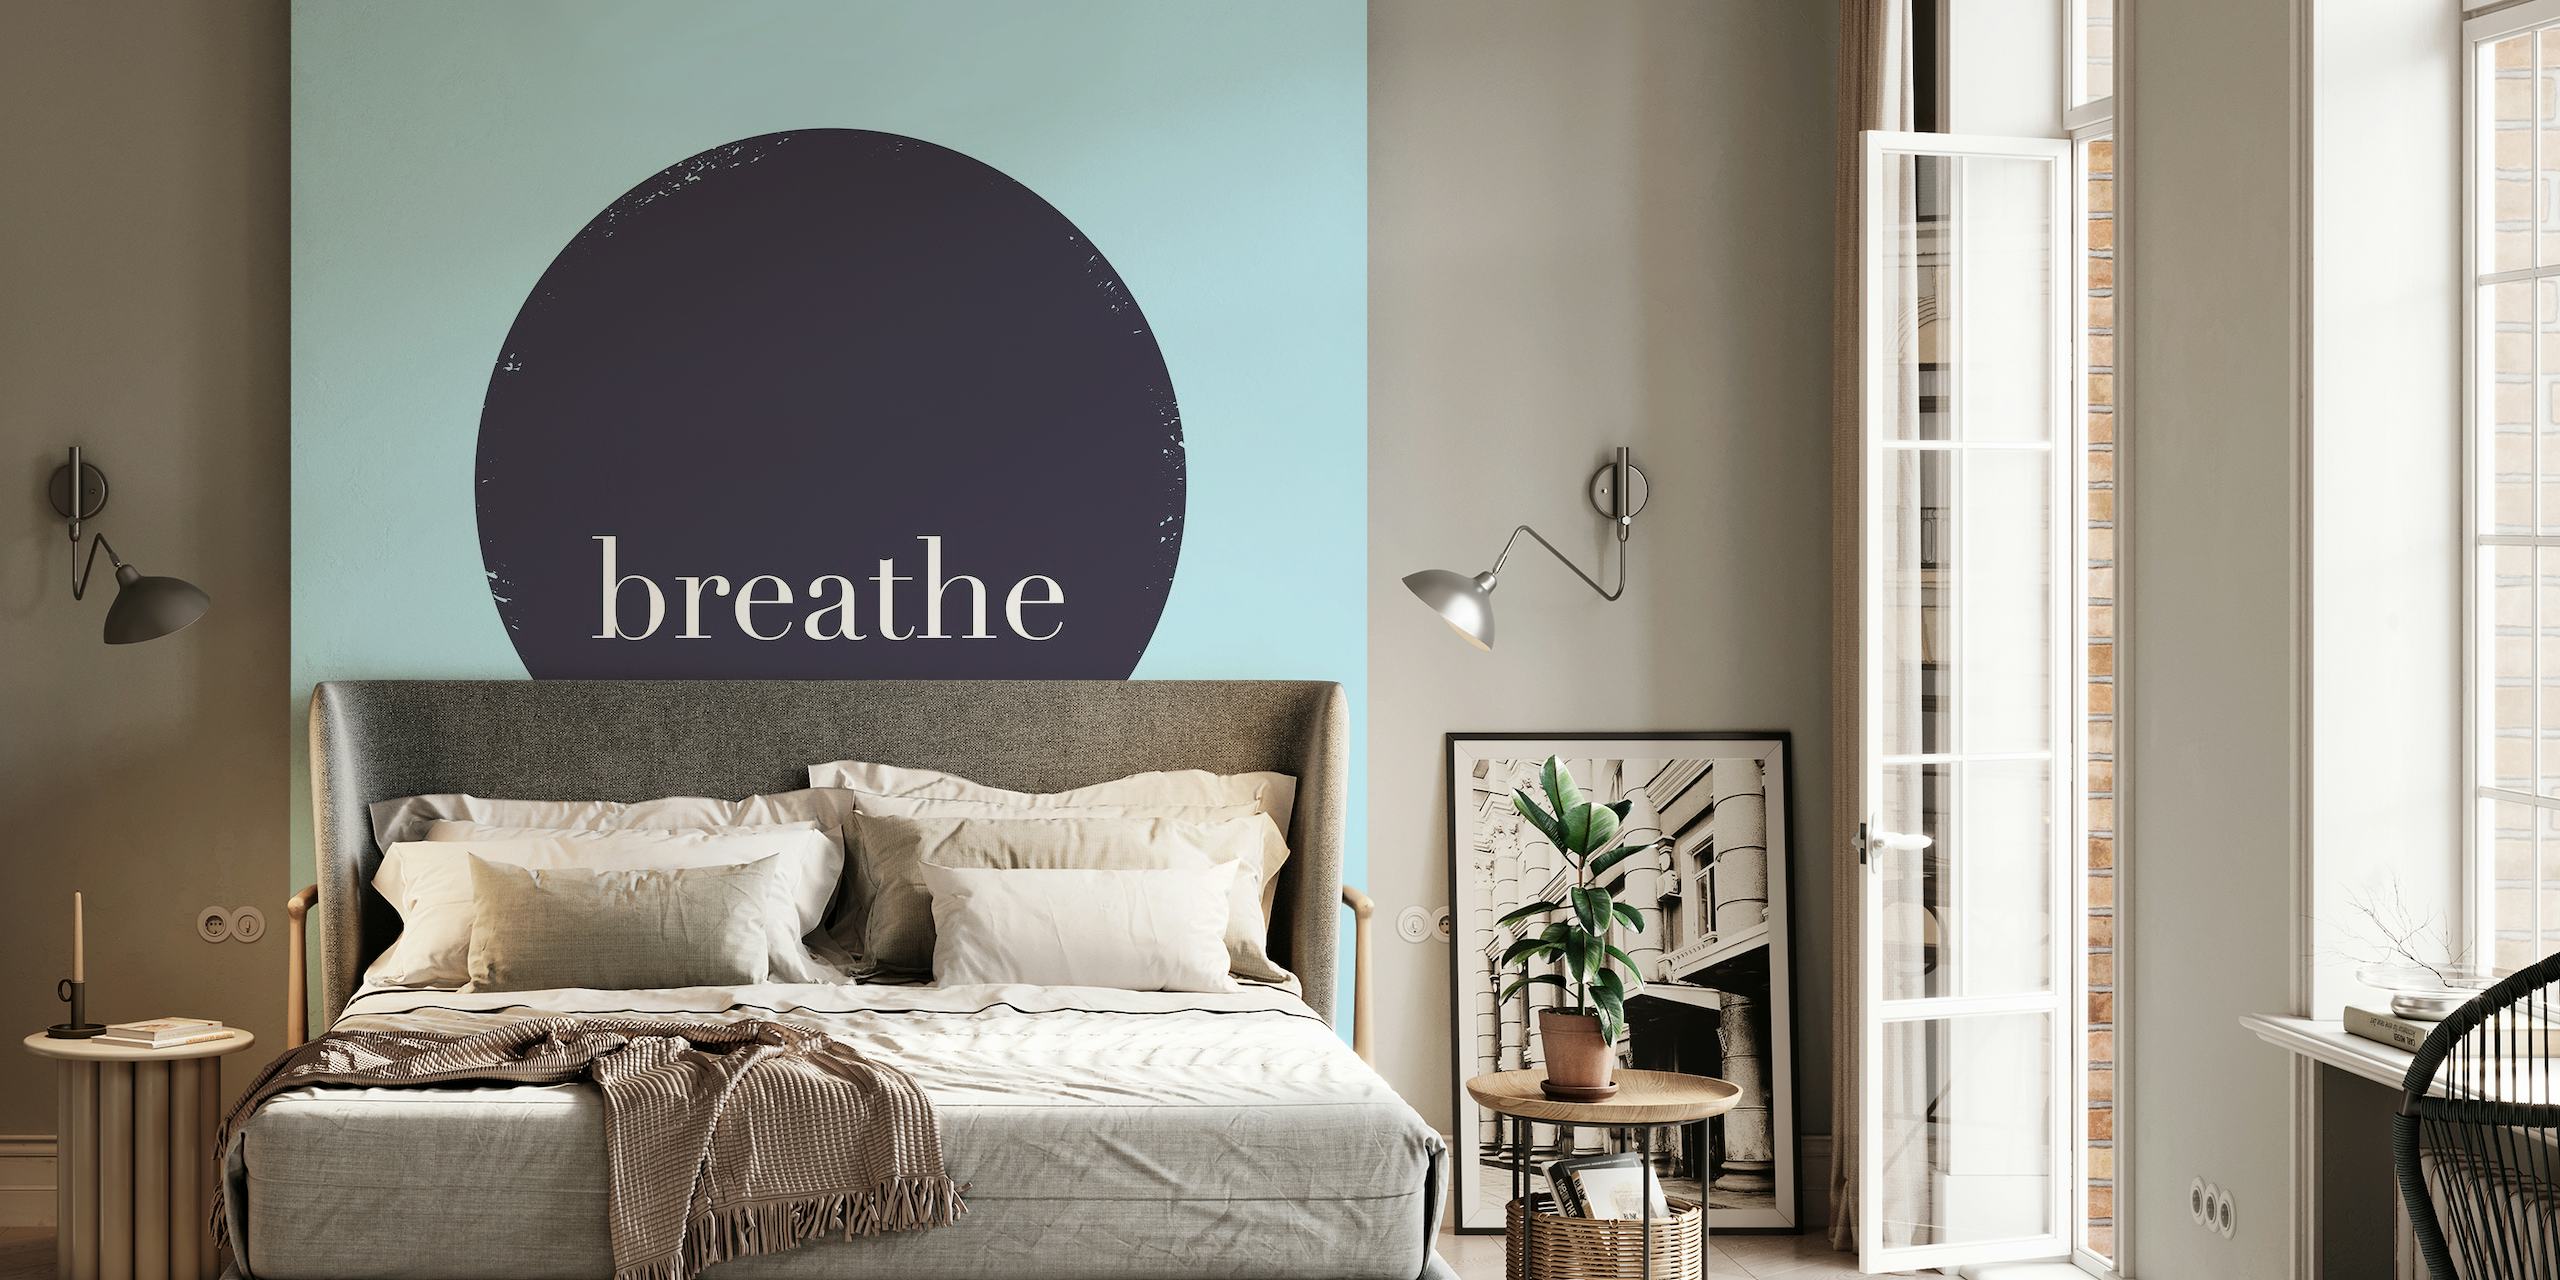 Minimalistic 'Breathe' word art with geometric circle on pastel blue background wall mural